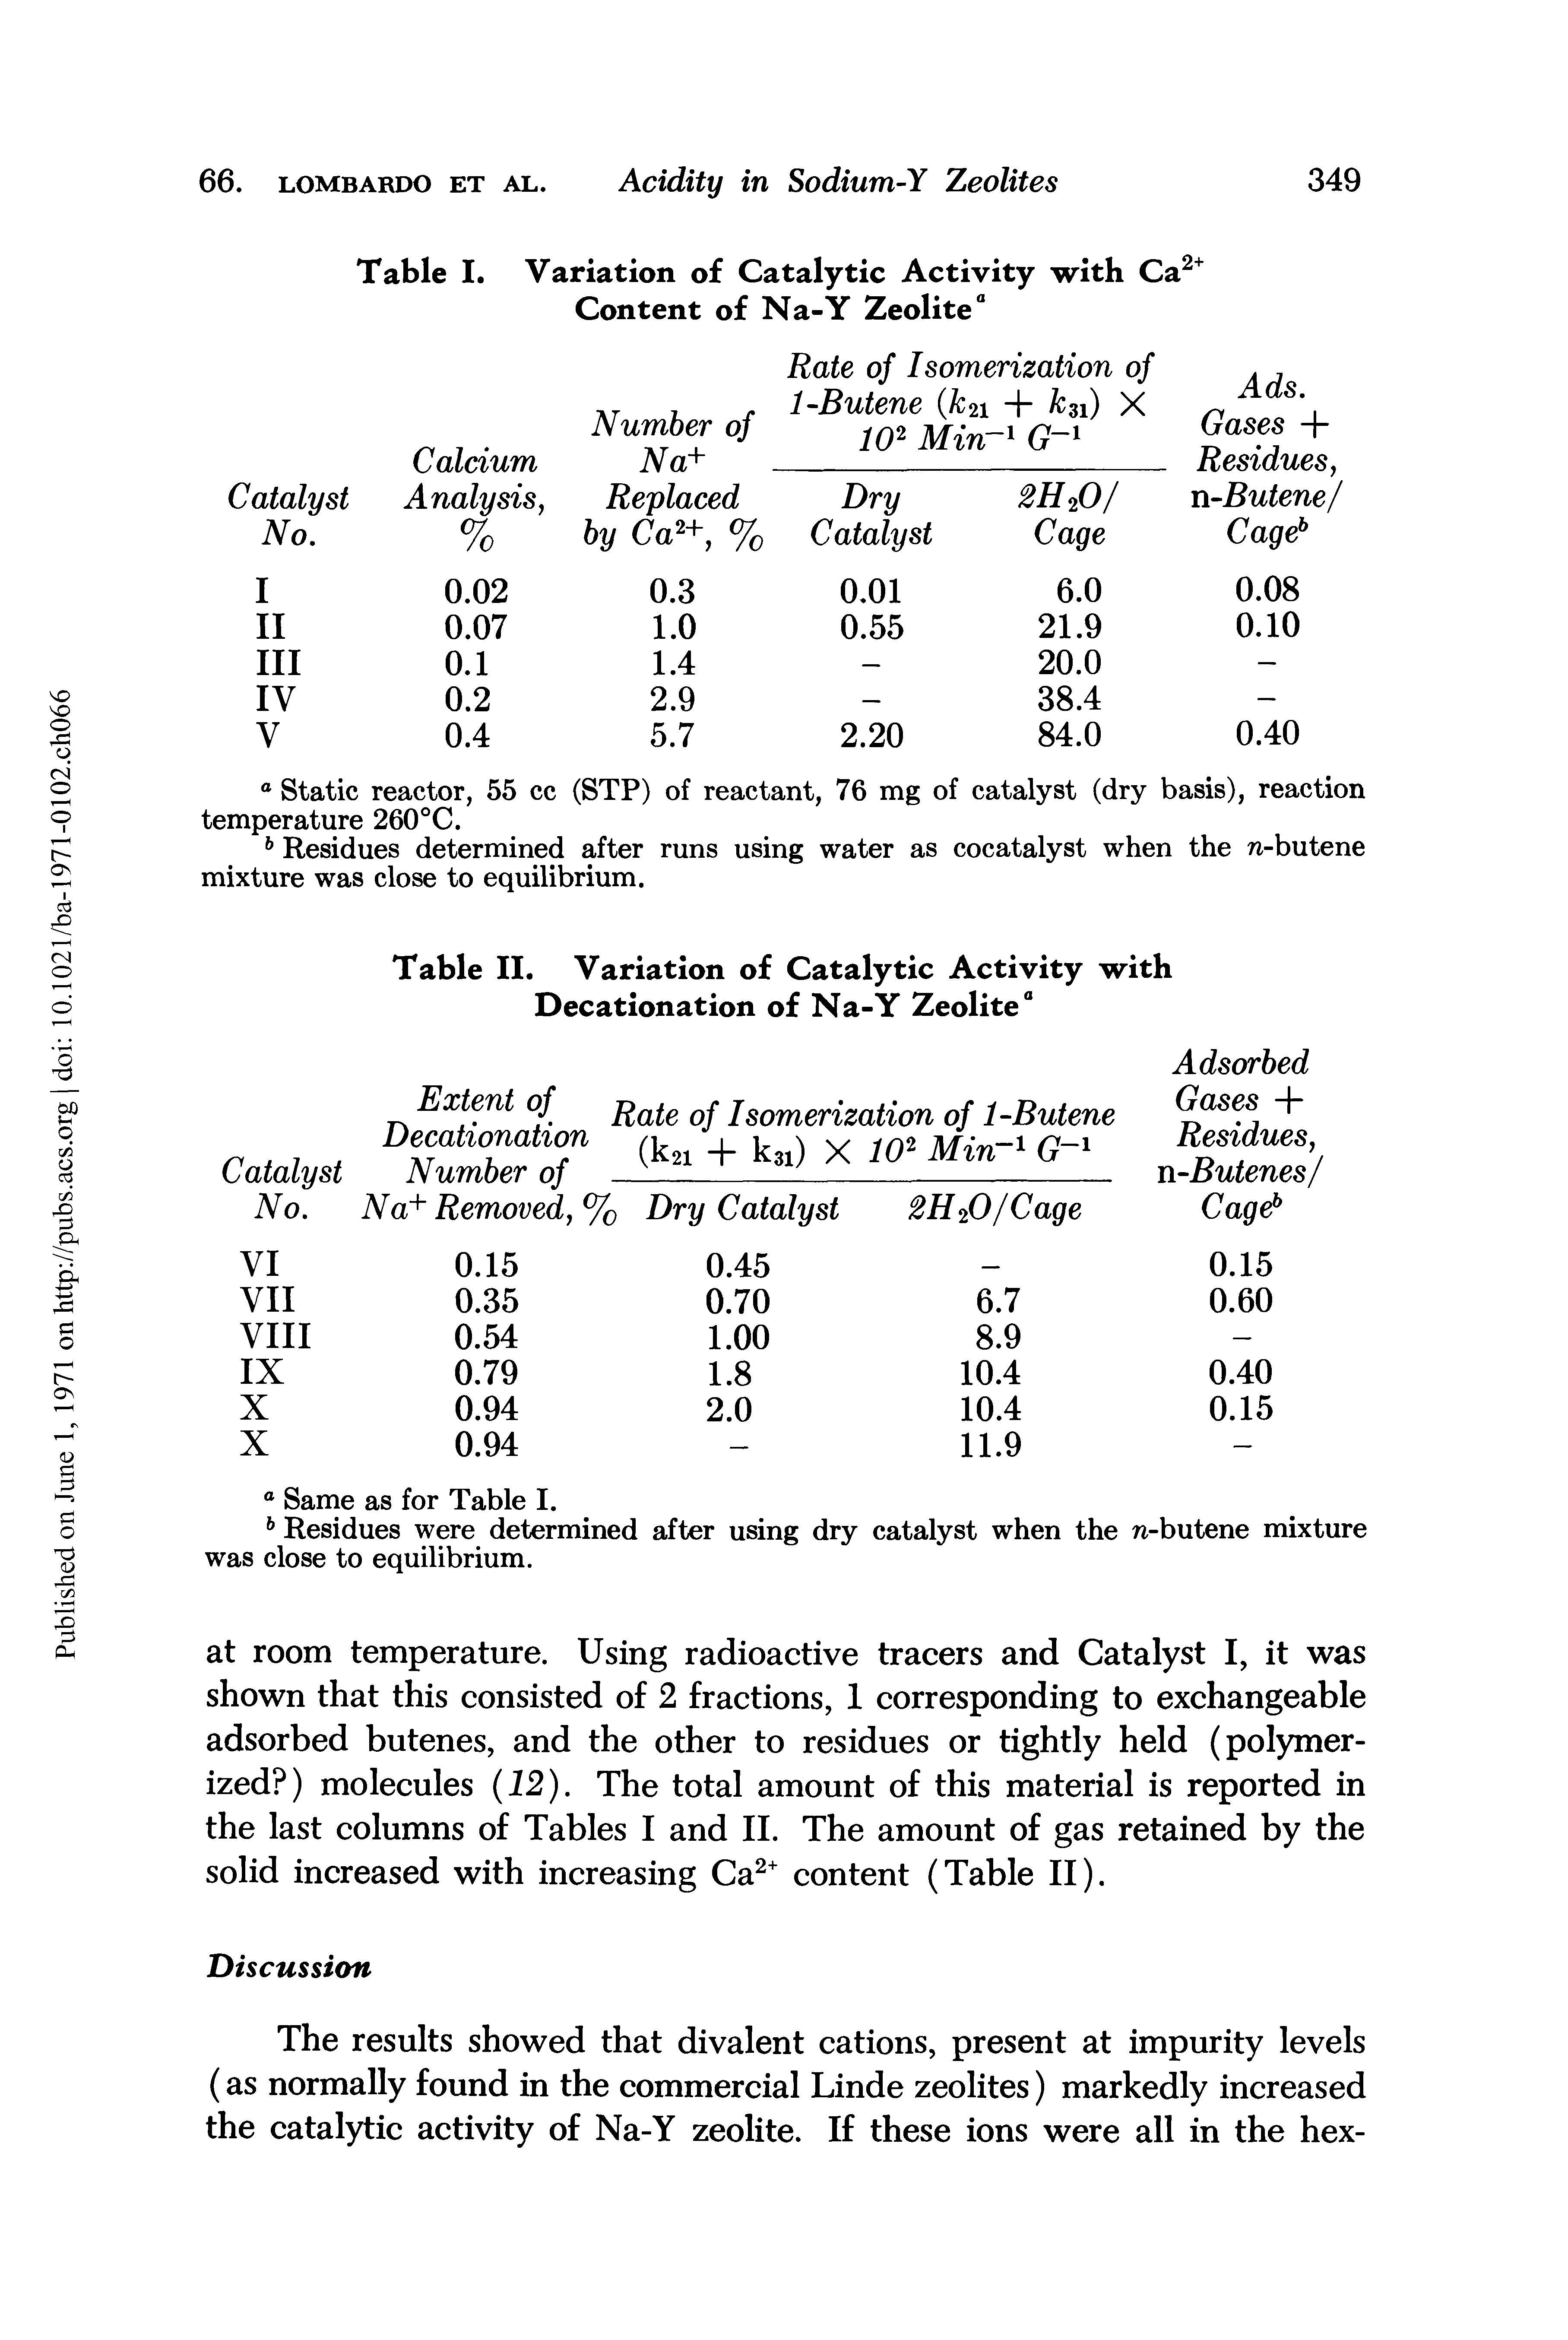 Table I. Variation of Catalytic Activity with Ca " Content of Na-Y Zeolite"...